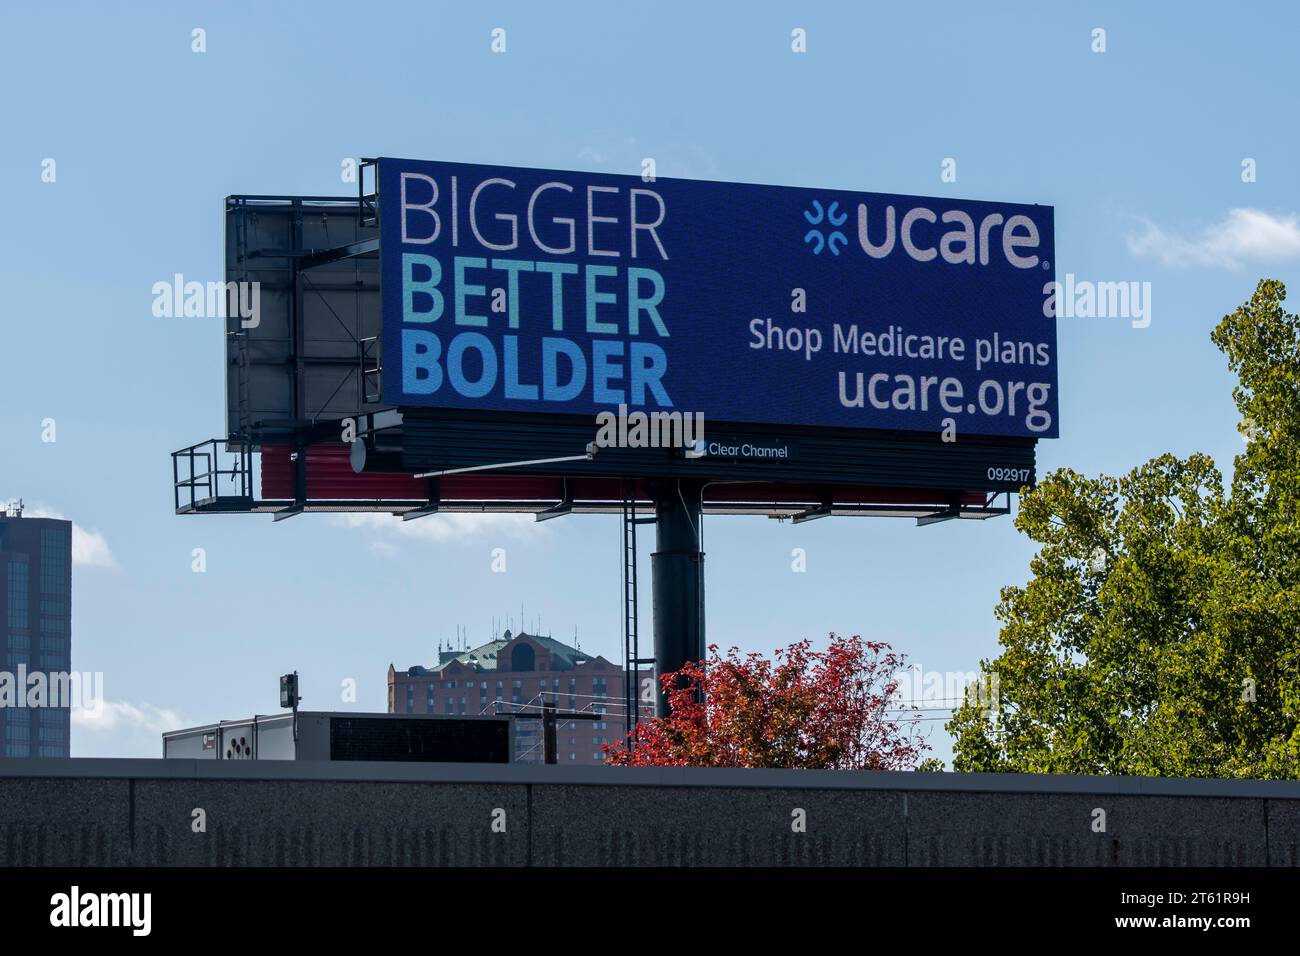 St. Paul, Minnesota.  End of the year medicare plans. U-care advertising bigger, better and bolder plans. Stock Photo